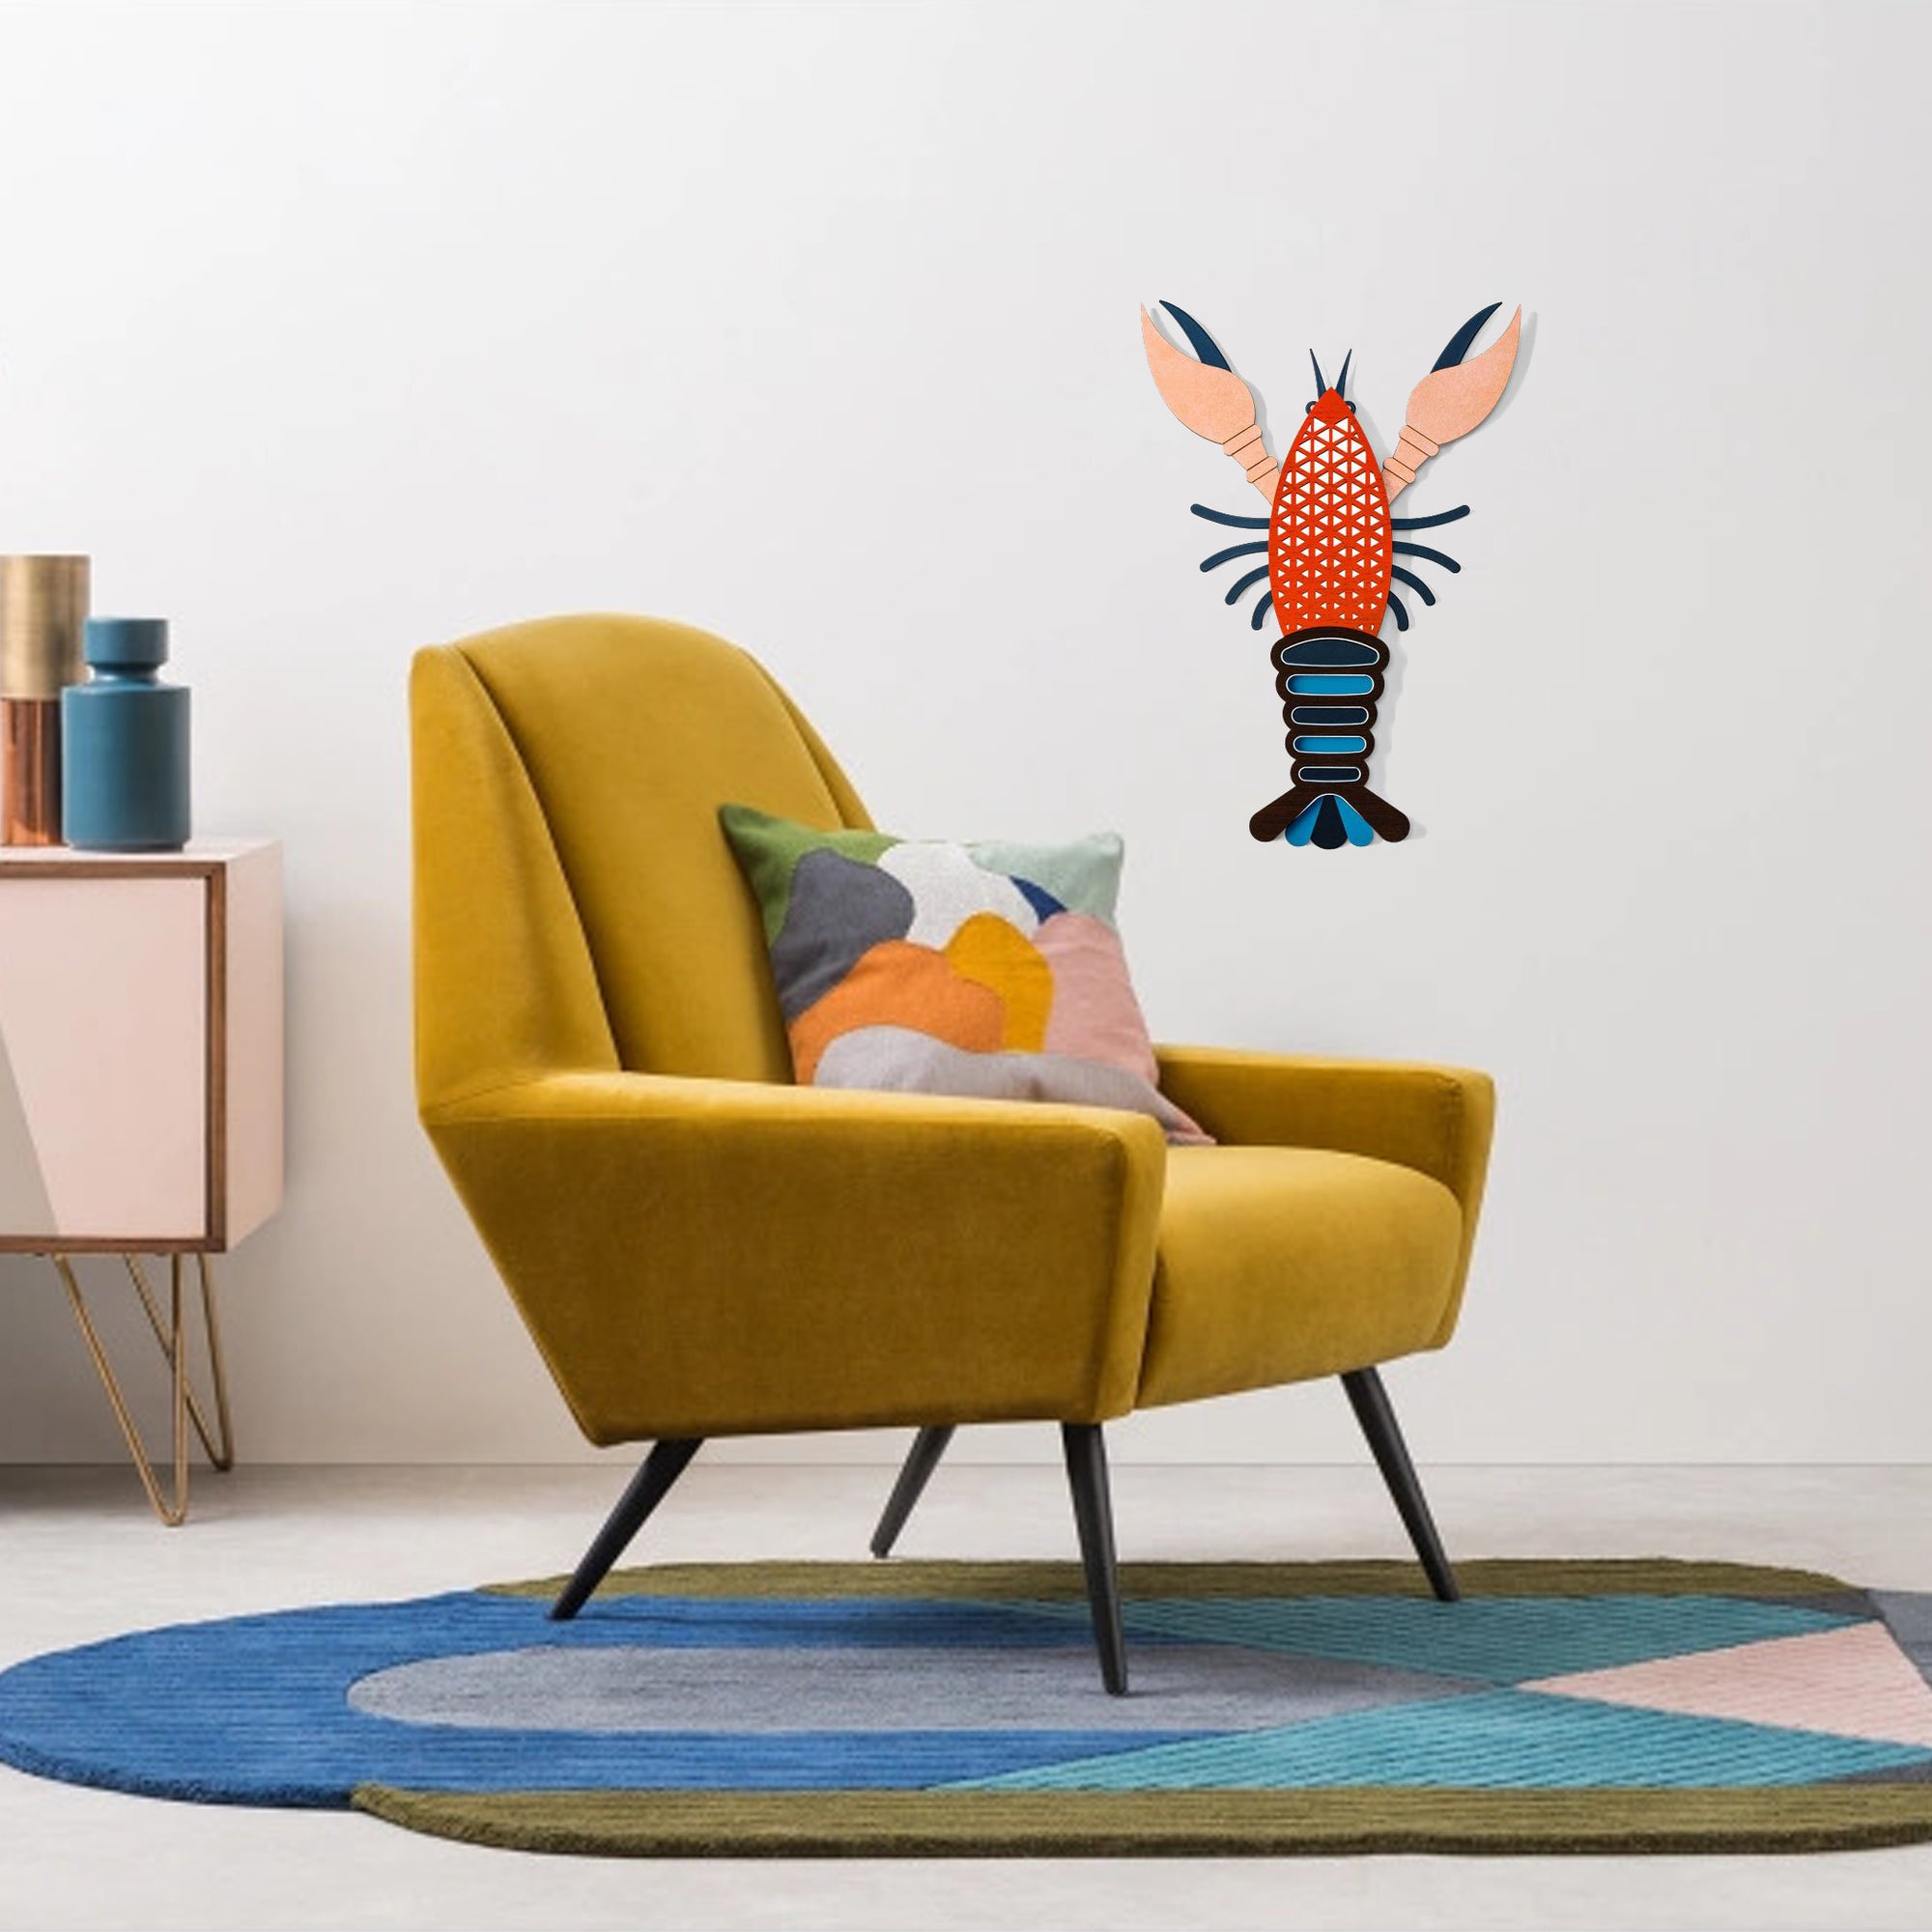 Colorful Wall Decor with Lobster